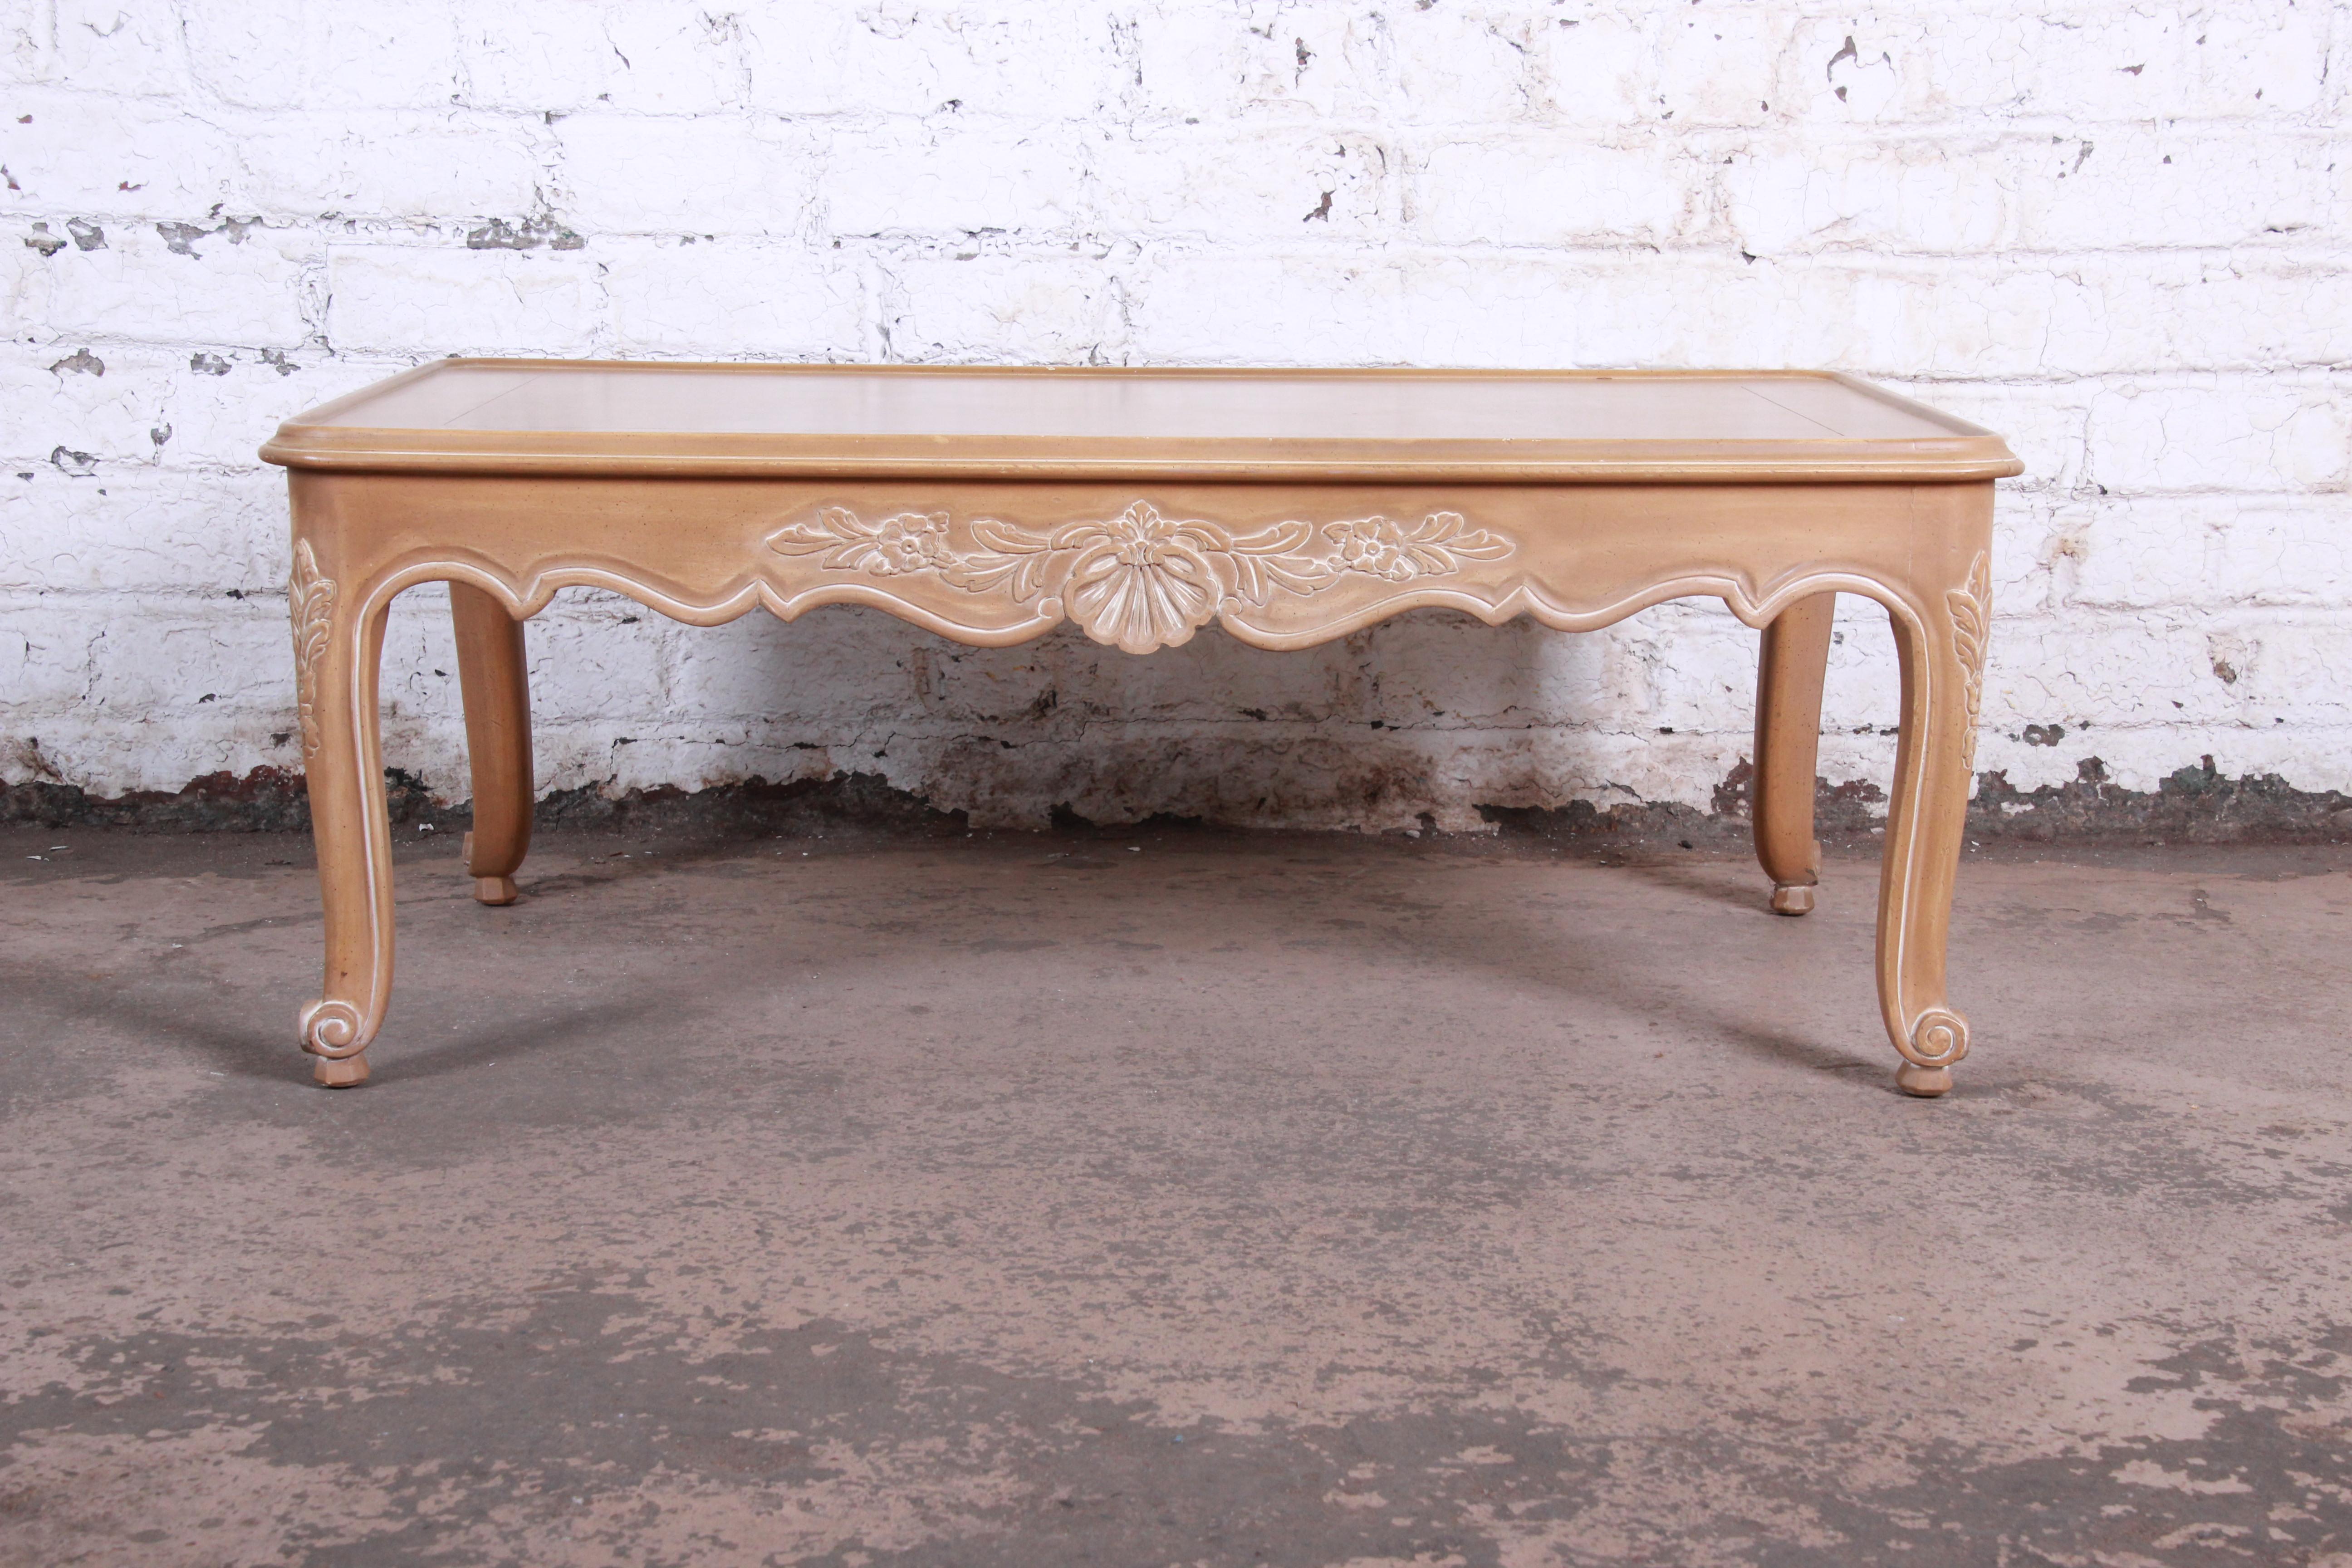 A gorgeous carved French Provincial Louis XV style coffee table by Kindel Furniture of Grand Rapids. The table features beautiful carved wood details, with a scalloped apron and cabriole legs. Made with the highest quality craftsmanship, as expected